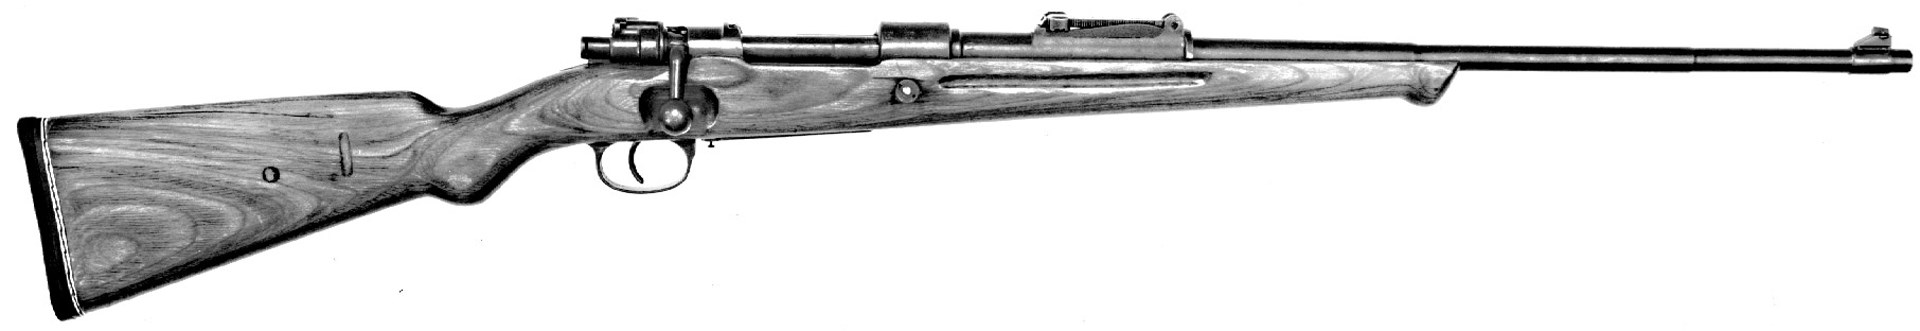 Right-side view sporterized mauser 98k rifle